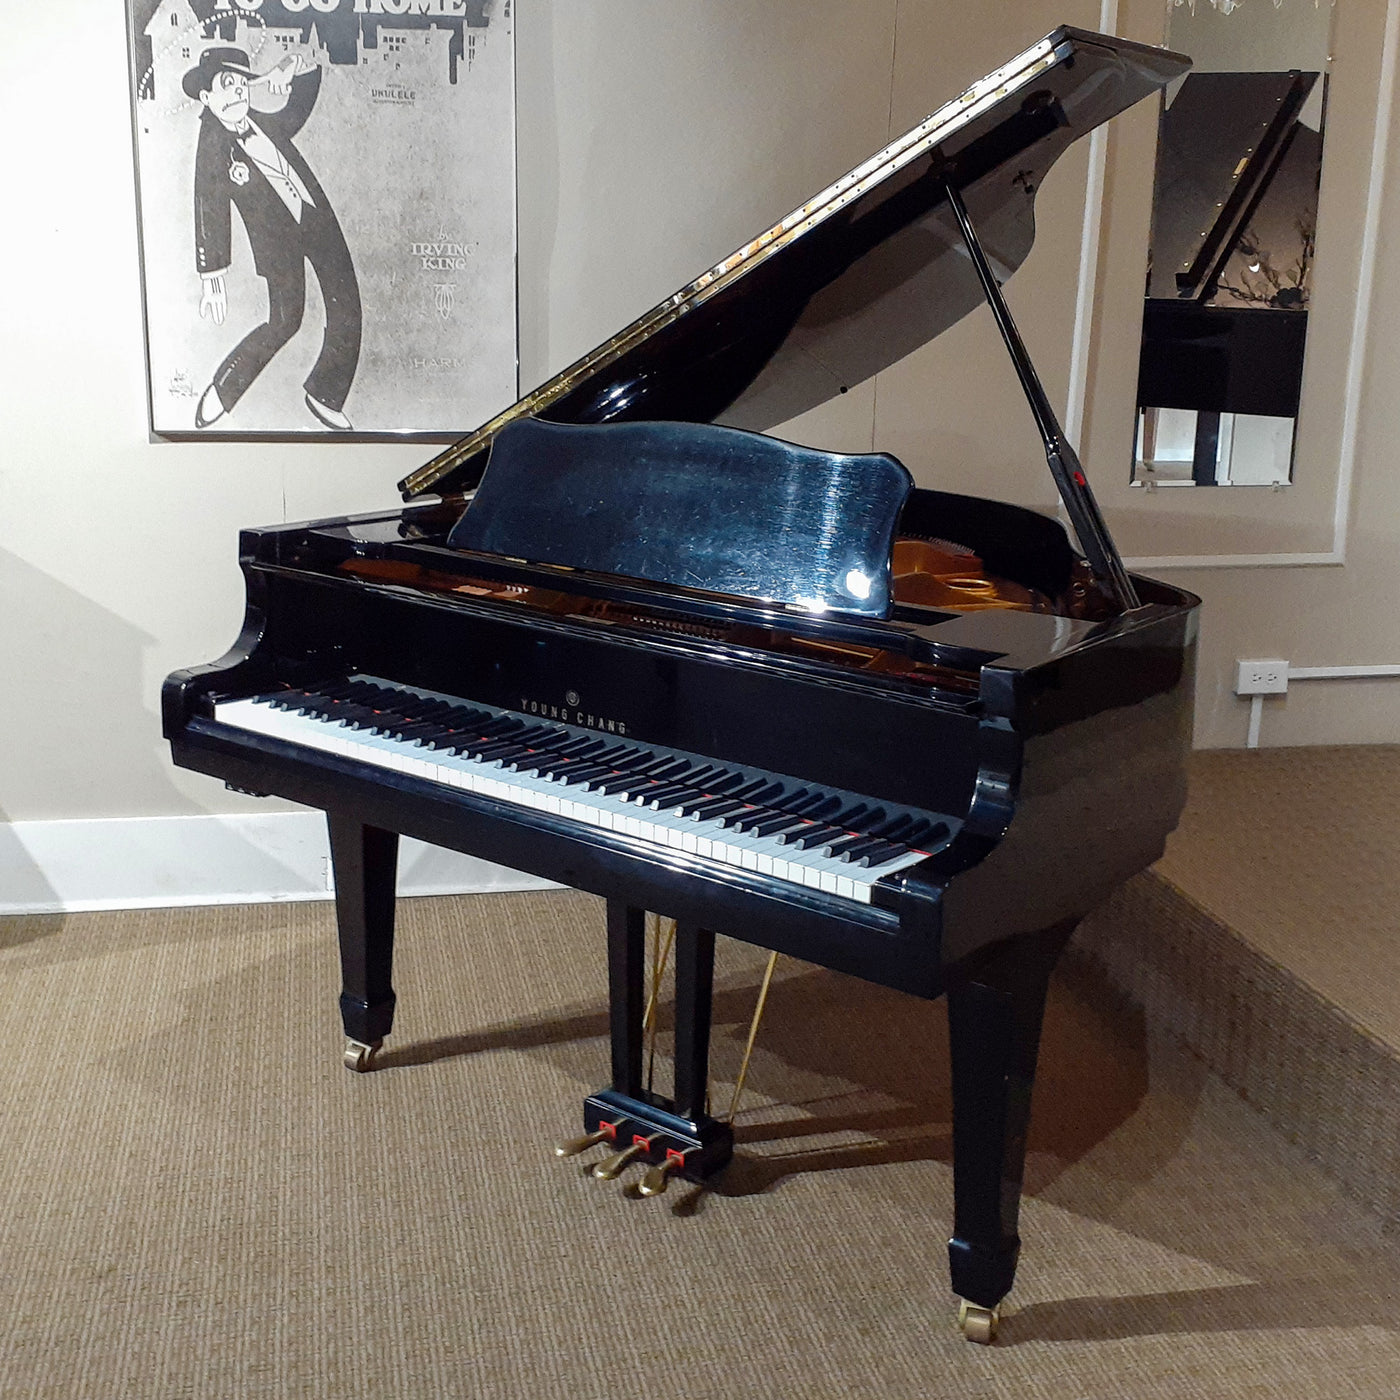 Young Chang G150 Polished Ebony Baby Grand Piano | New